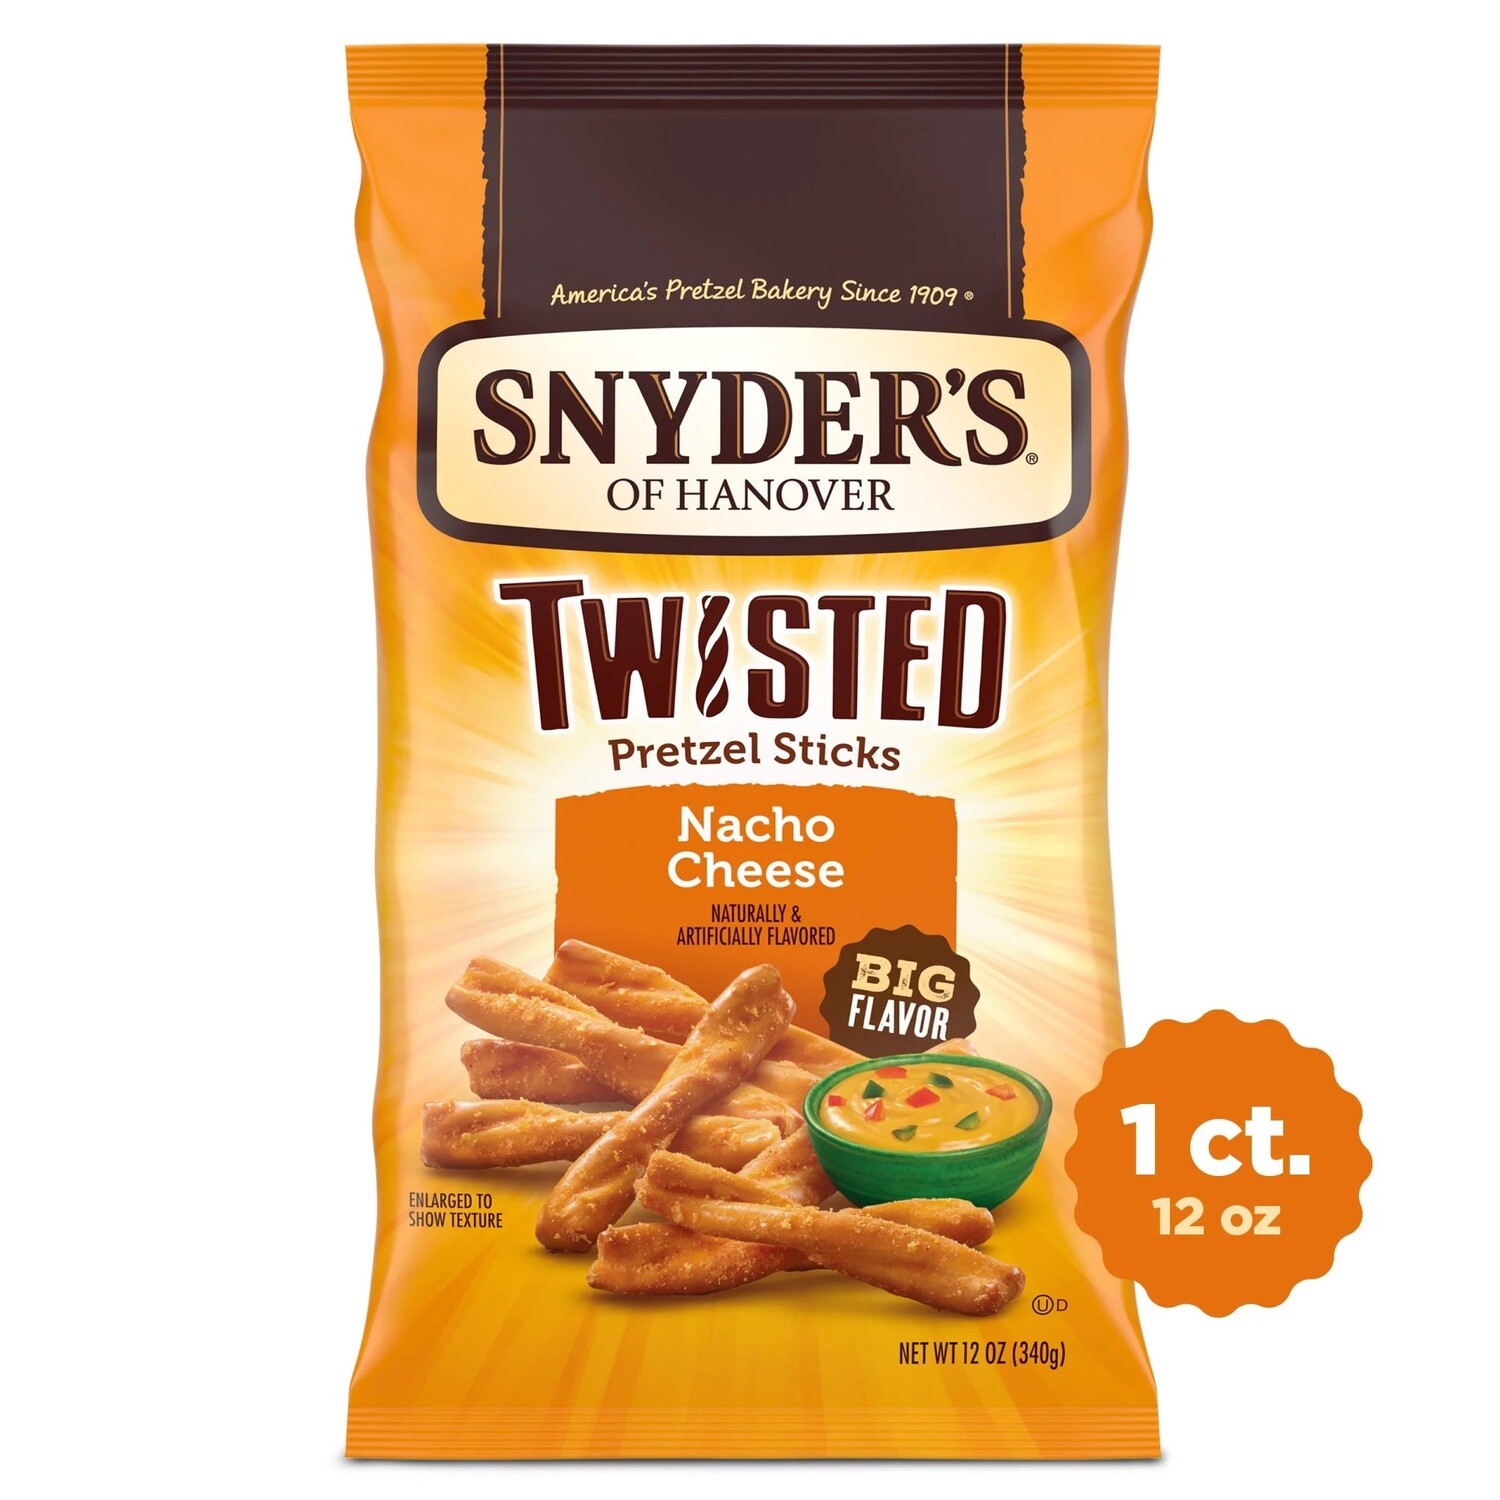 Snyder's Twisted - Nacho Cheese